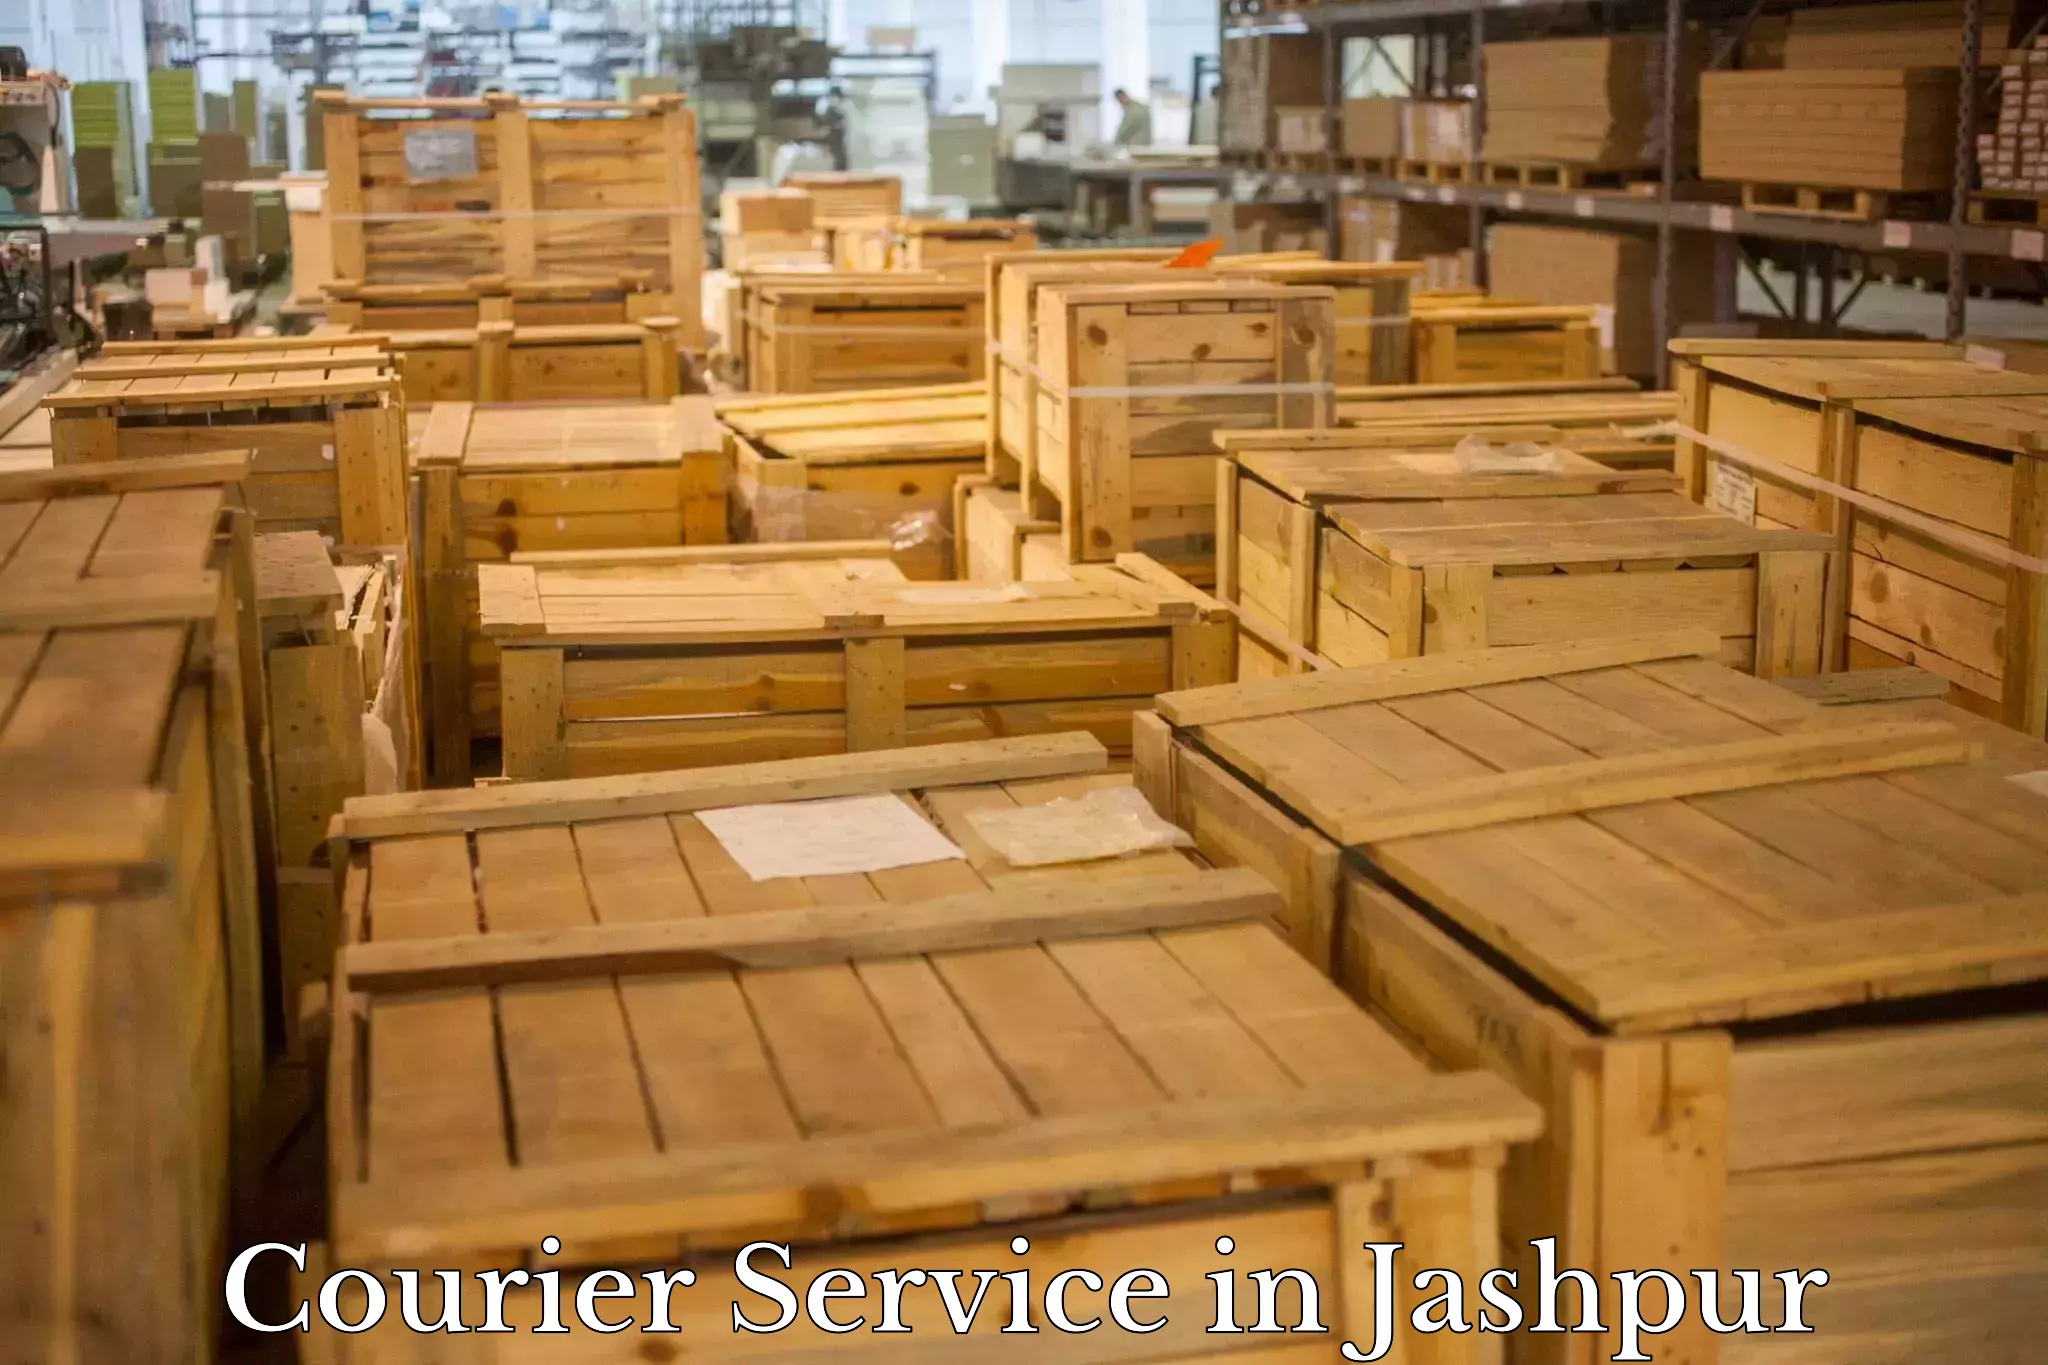 Nationwide delivery network in Jashpur